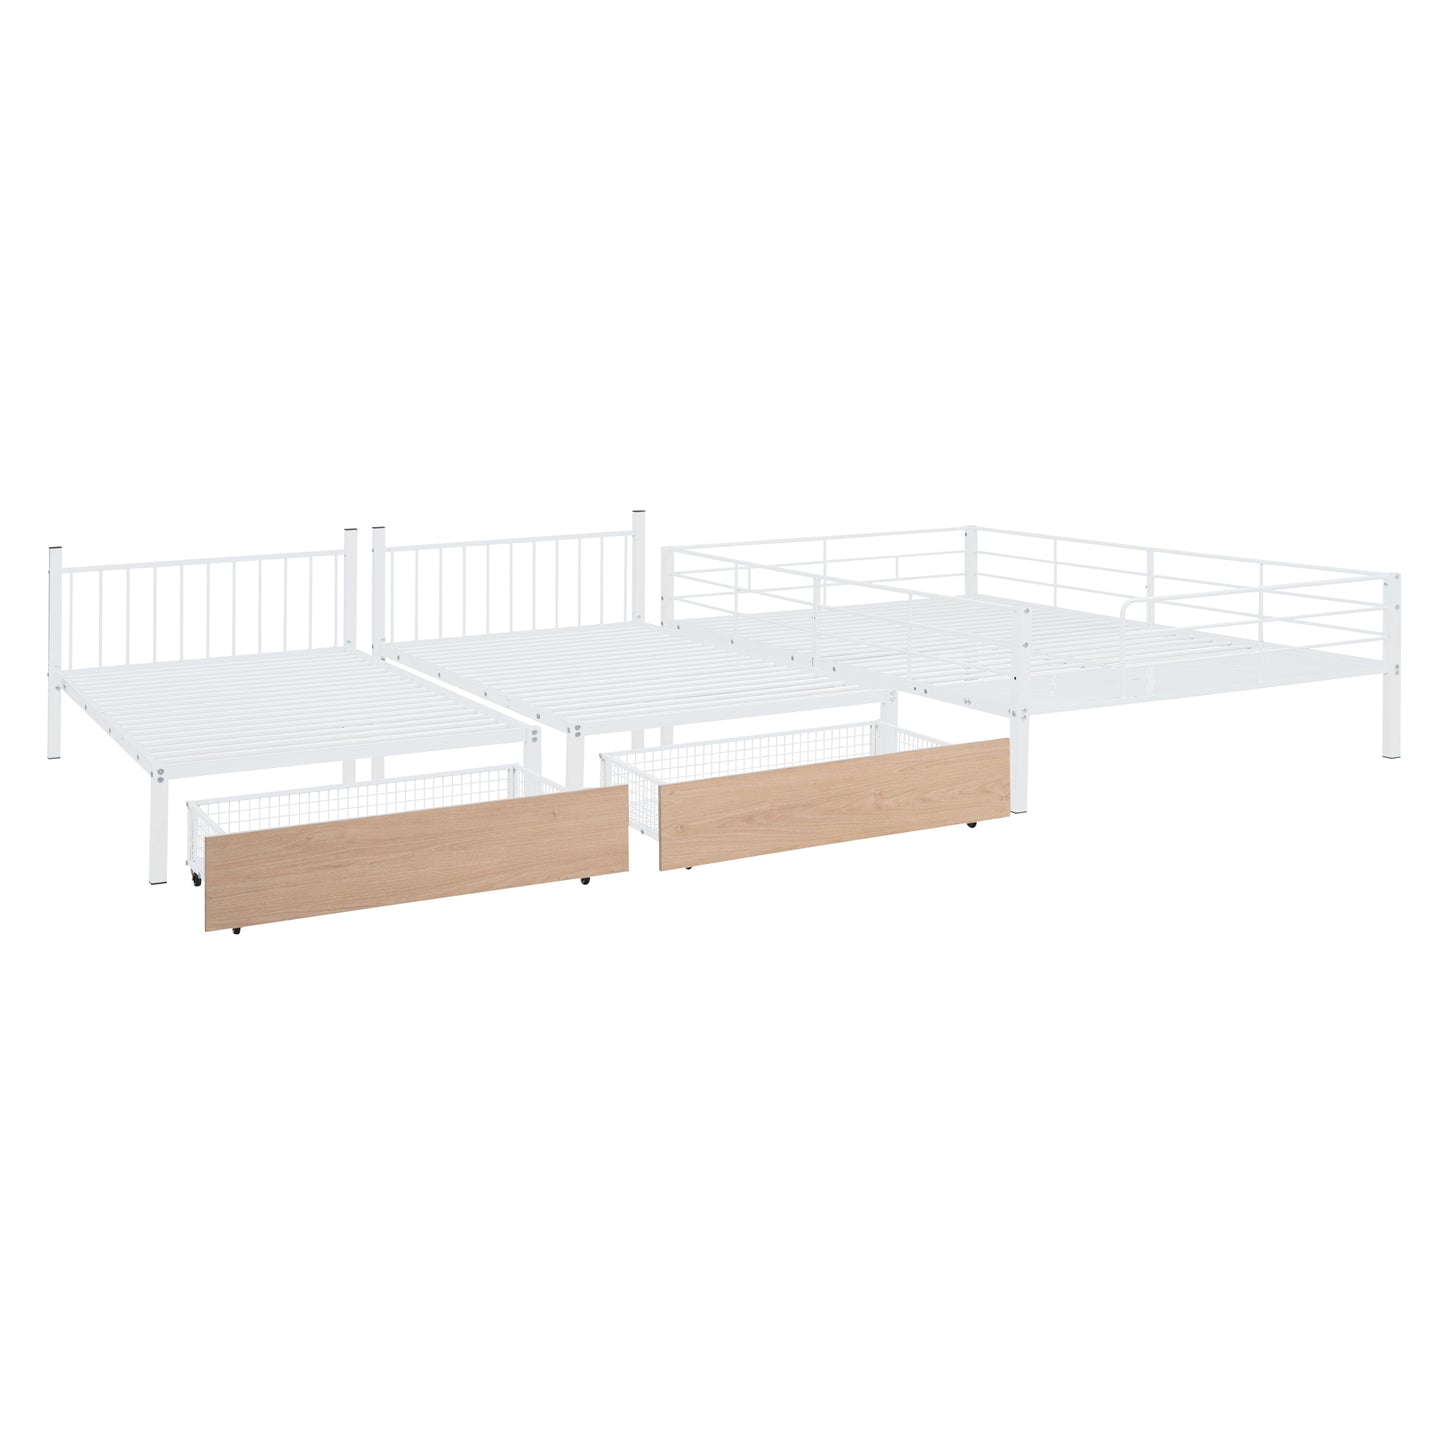 Full Over Twin & Twin Triple Bunk Bed with Drawers, Multi-functional Metal Frame Bed with desks and shelves in the middle, White